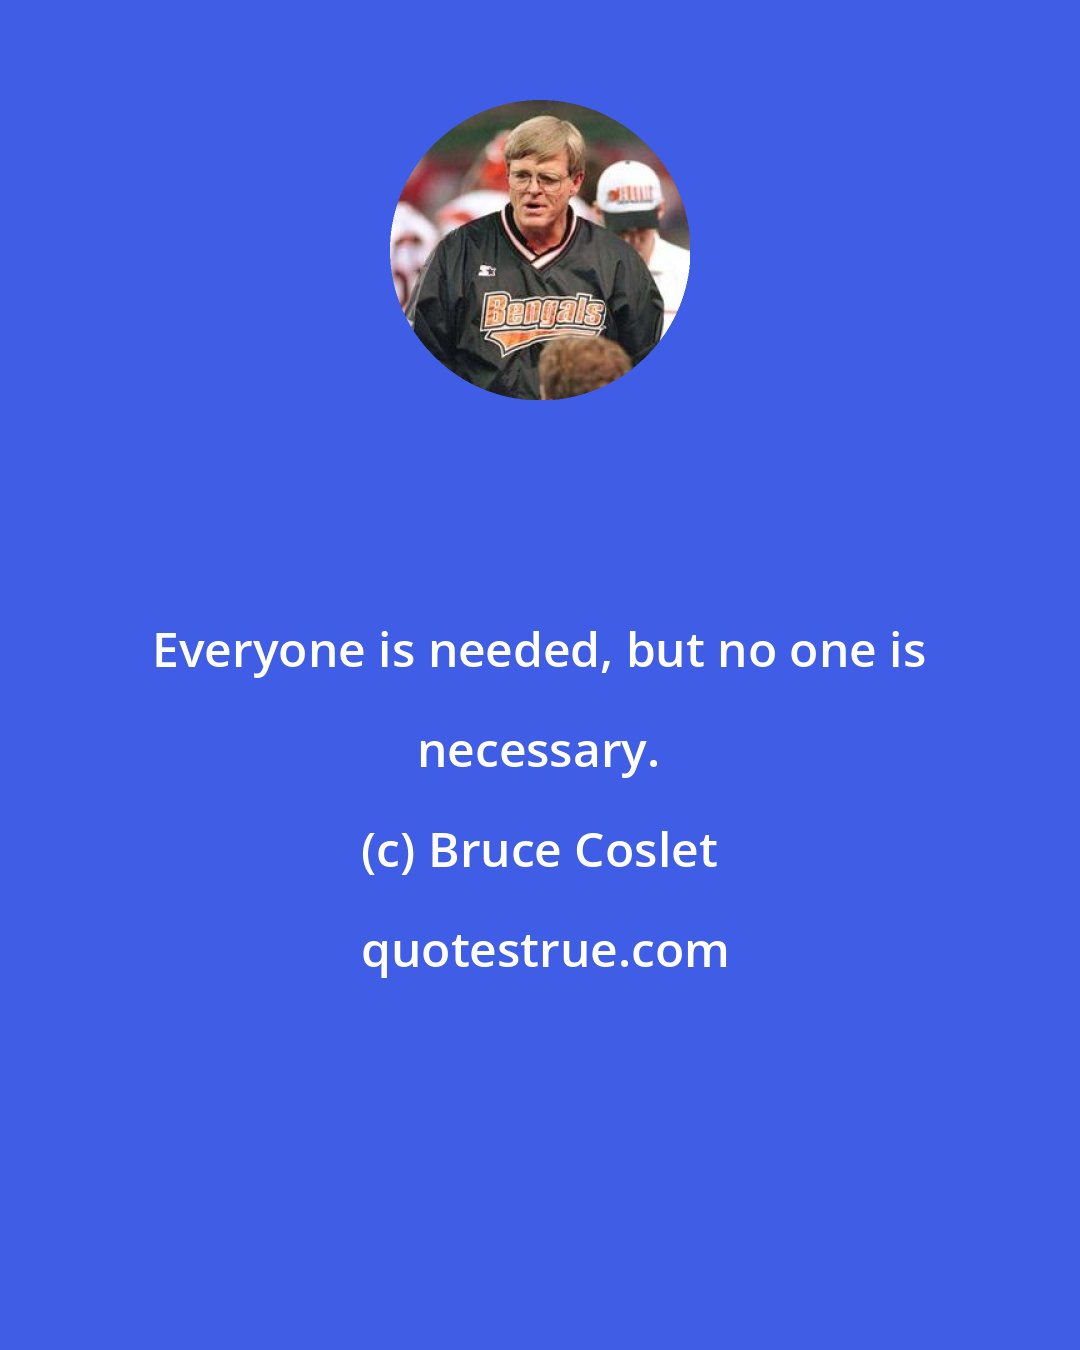 Bruce Coslet: Everyone is needed, but no one is necessary.